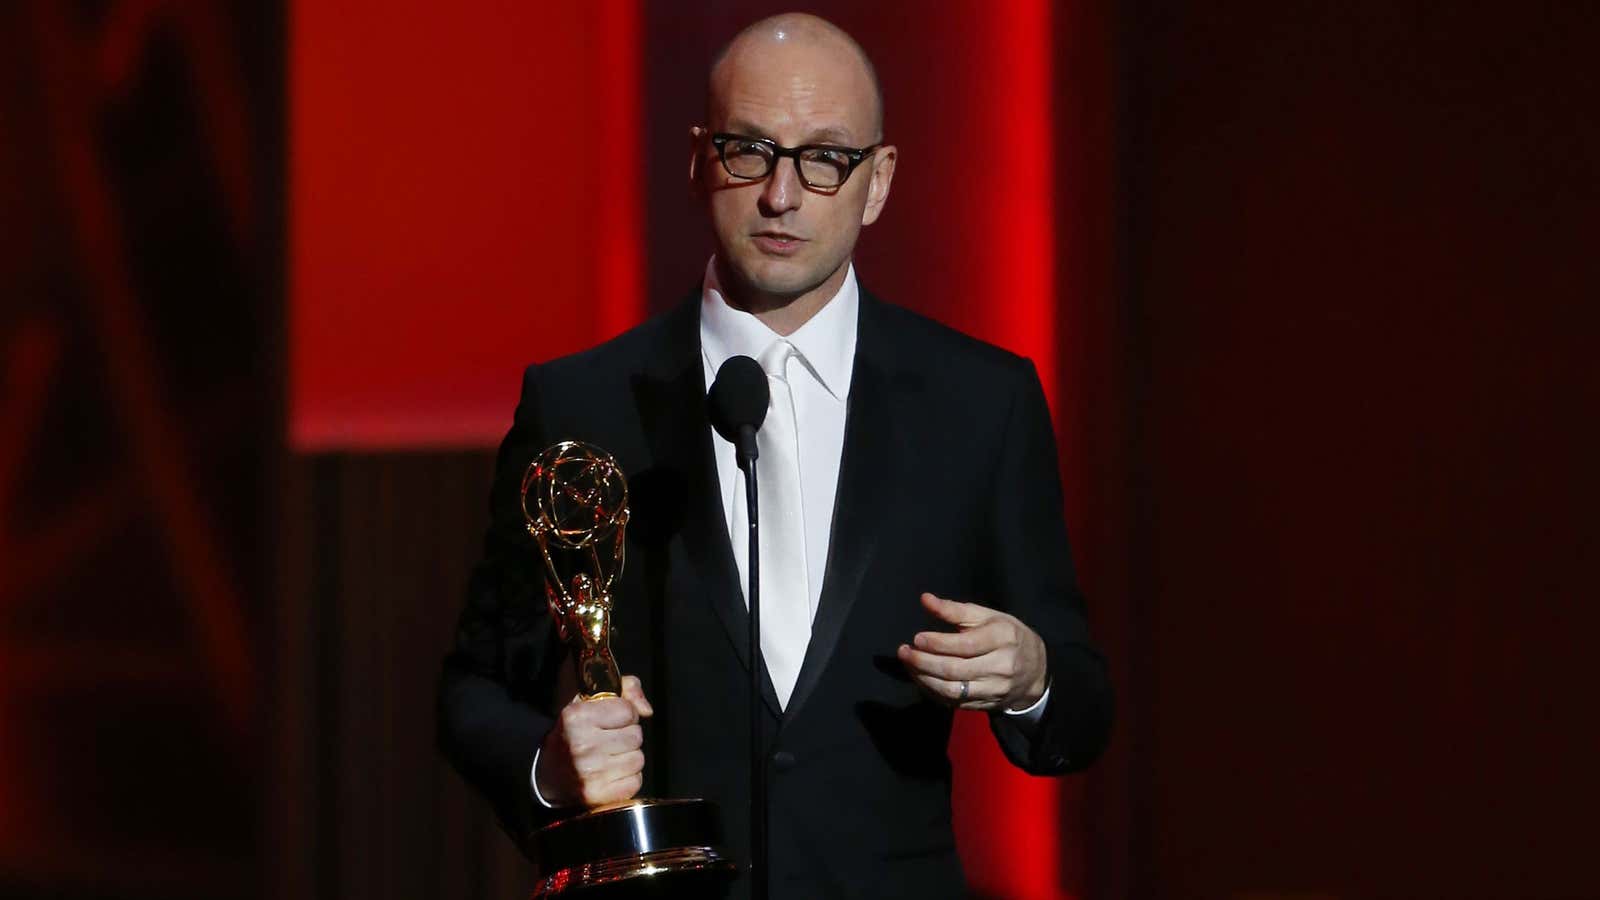 ‘The Knick’ director Steven Soderbergh is just one of many acclaimed movie-makers taking their talents to TV